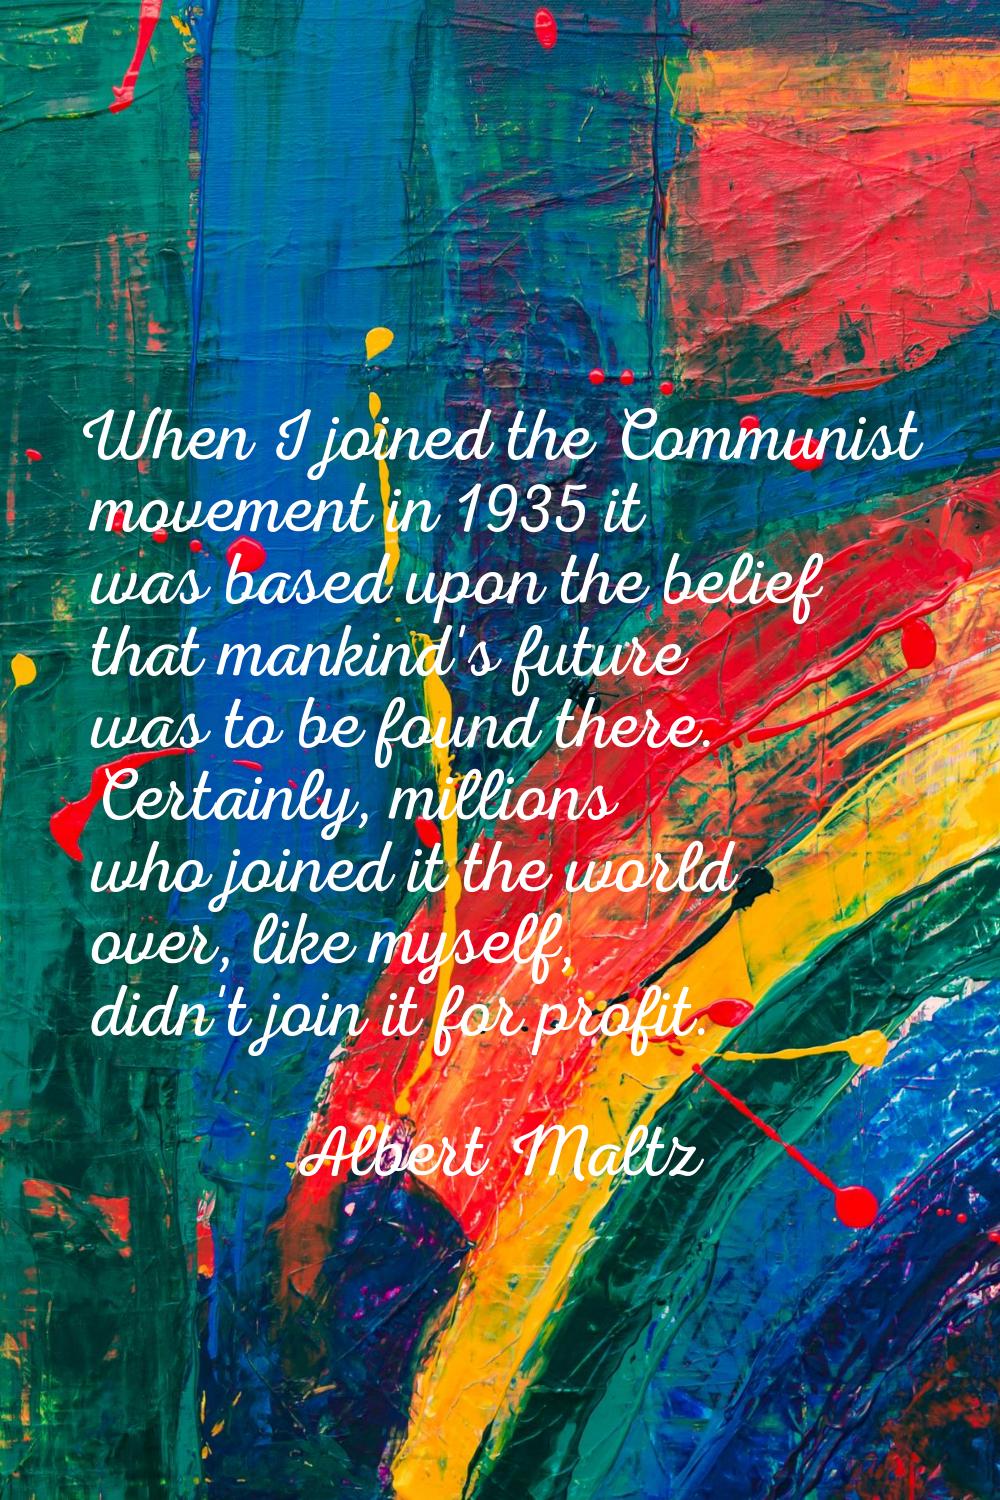 When I joined the Communist movement in 1935 it was based upon the belief that mankind's future was